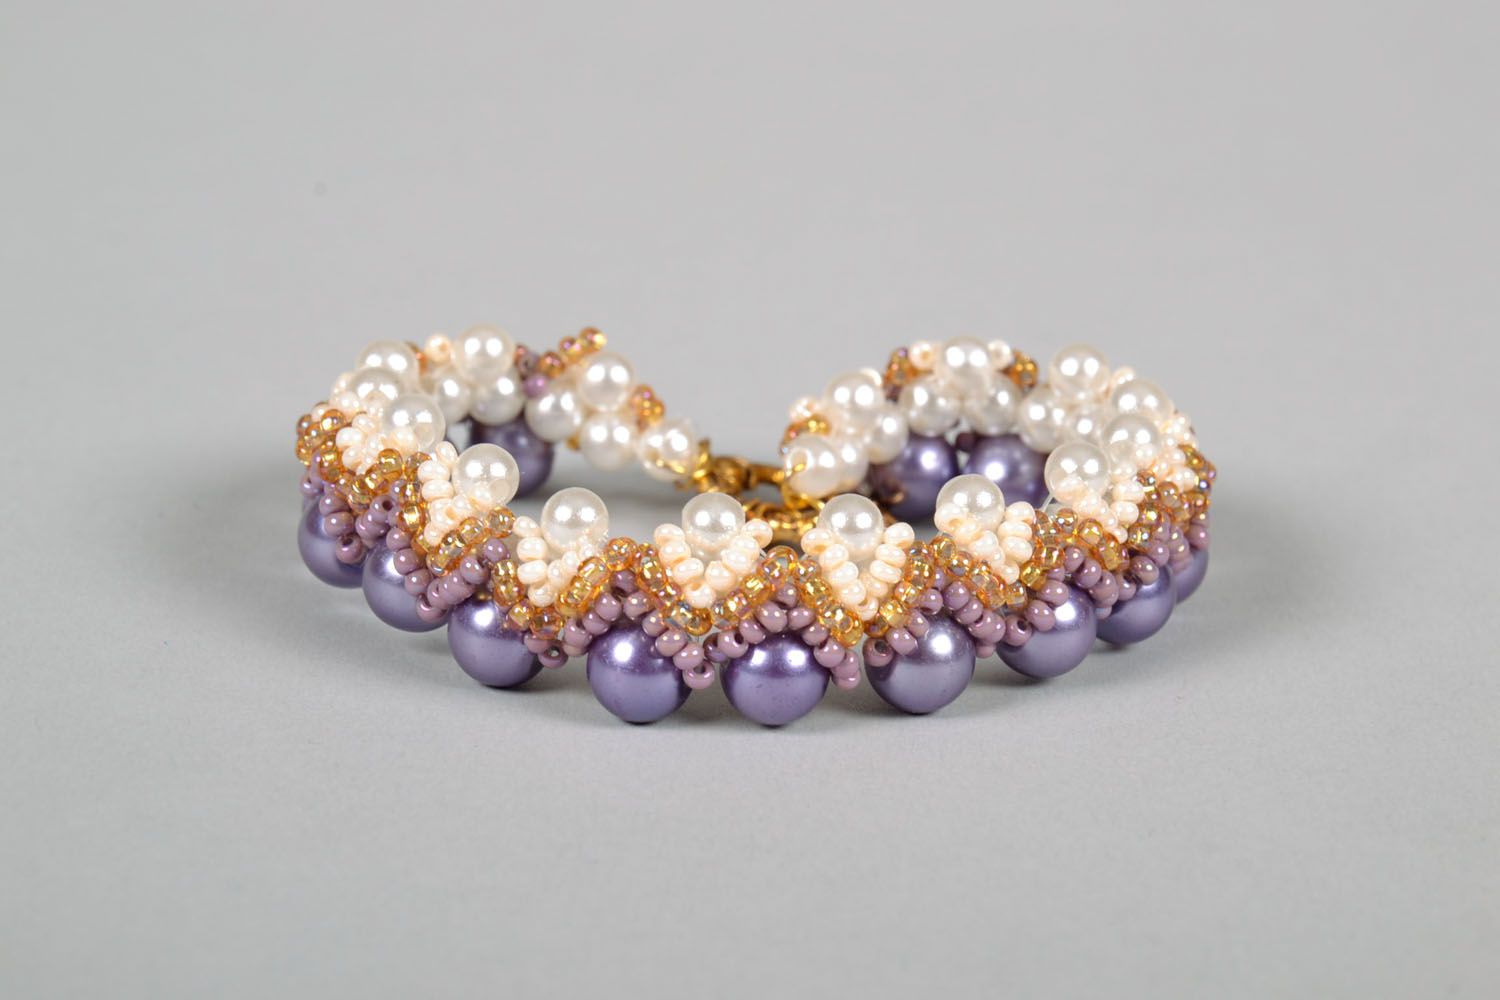 Bracelet made of beads and artificial pearls photo 2